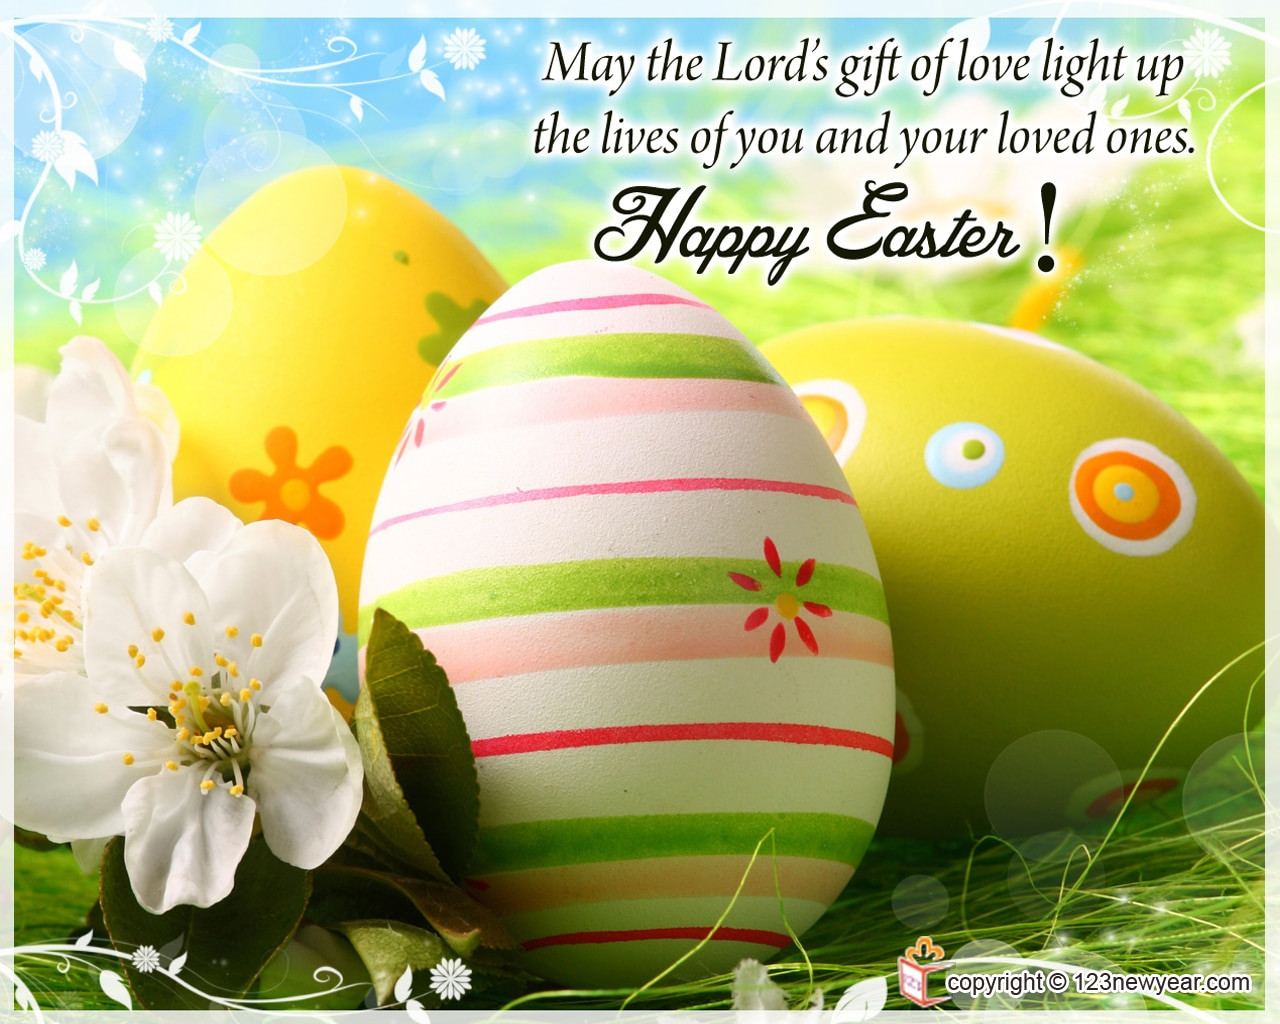 Happy Easter Quotes And Images
 Happy Easter Day 2021 Messages Wishes Status